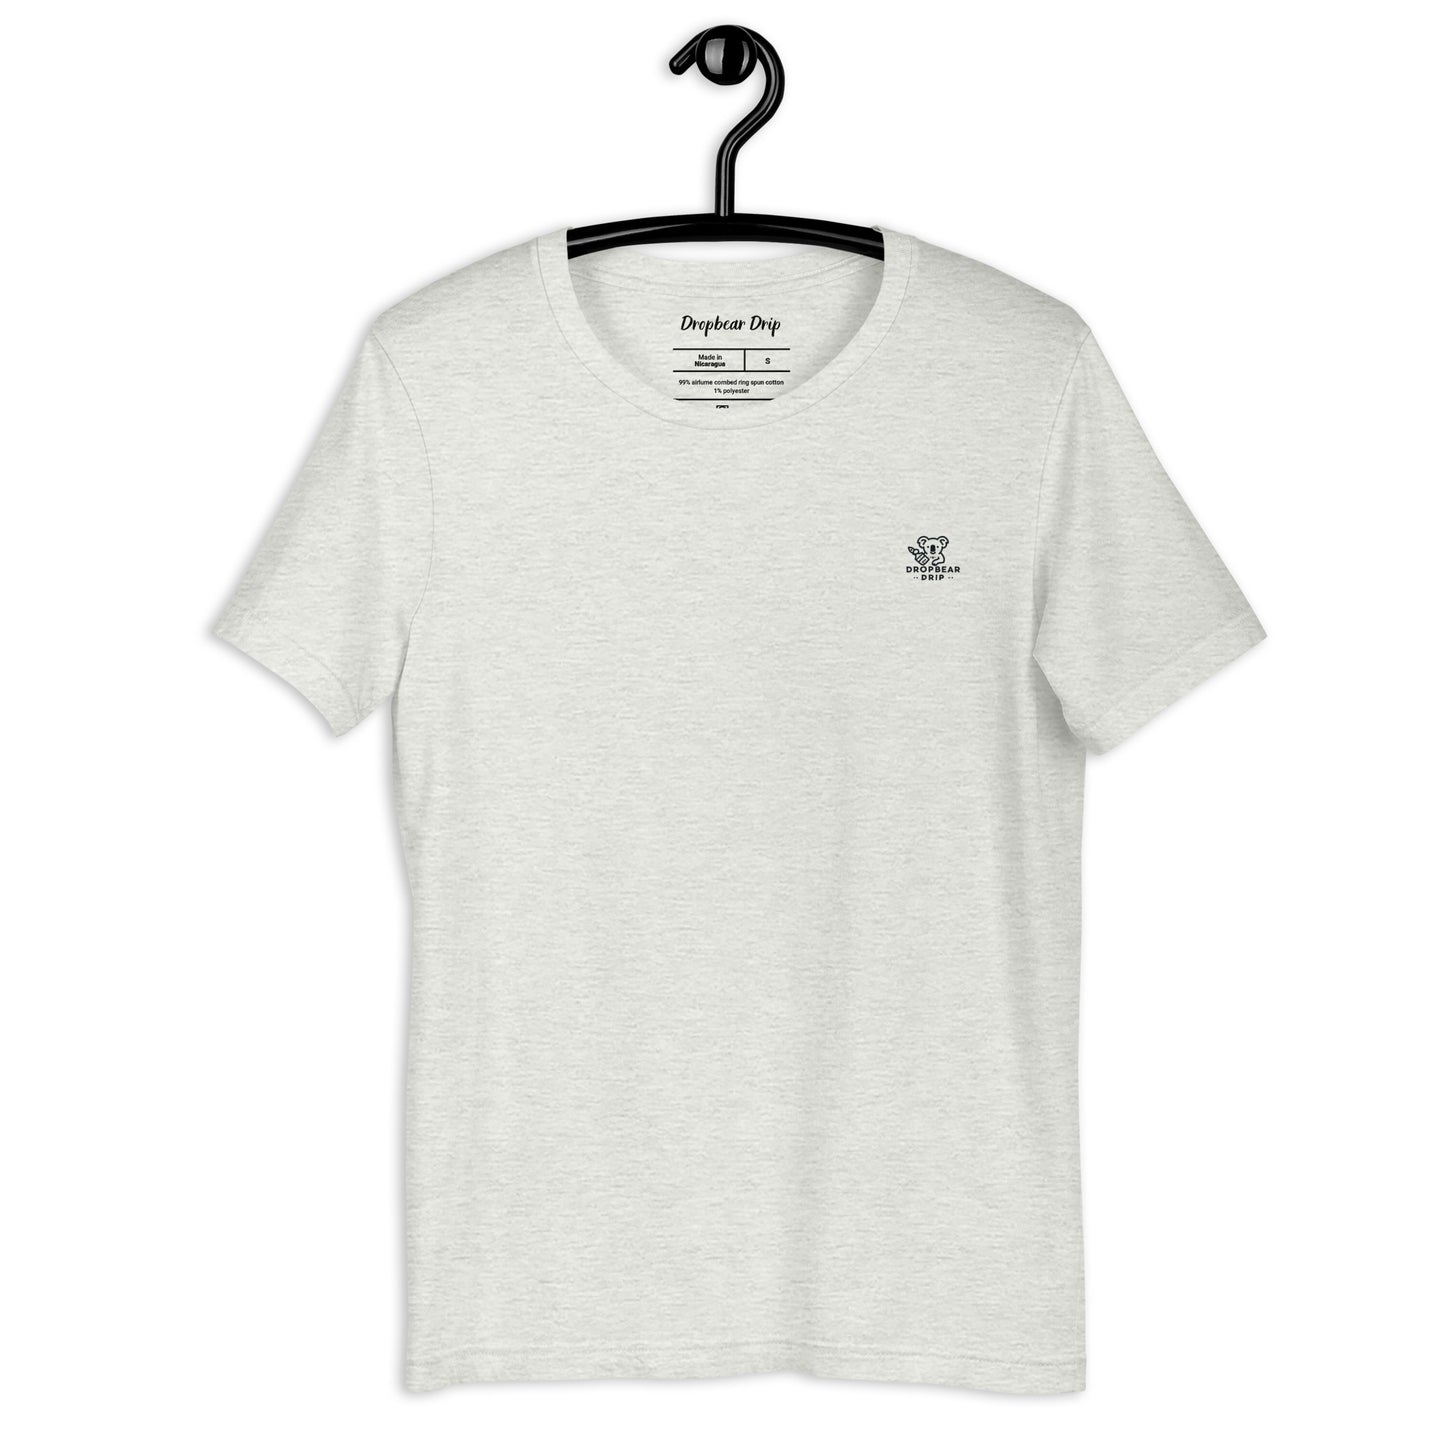 Have You Had Your Inner Health Plus Today? - Classic Cotton Tee